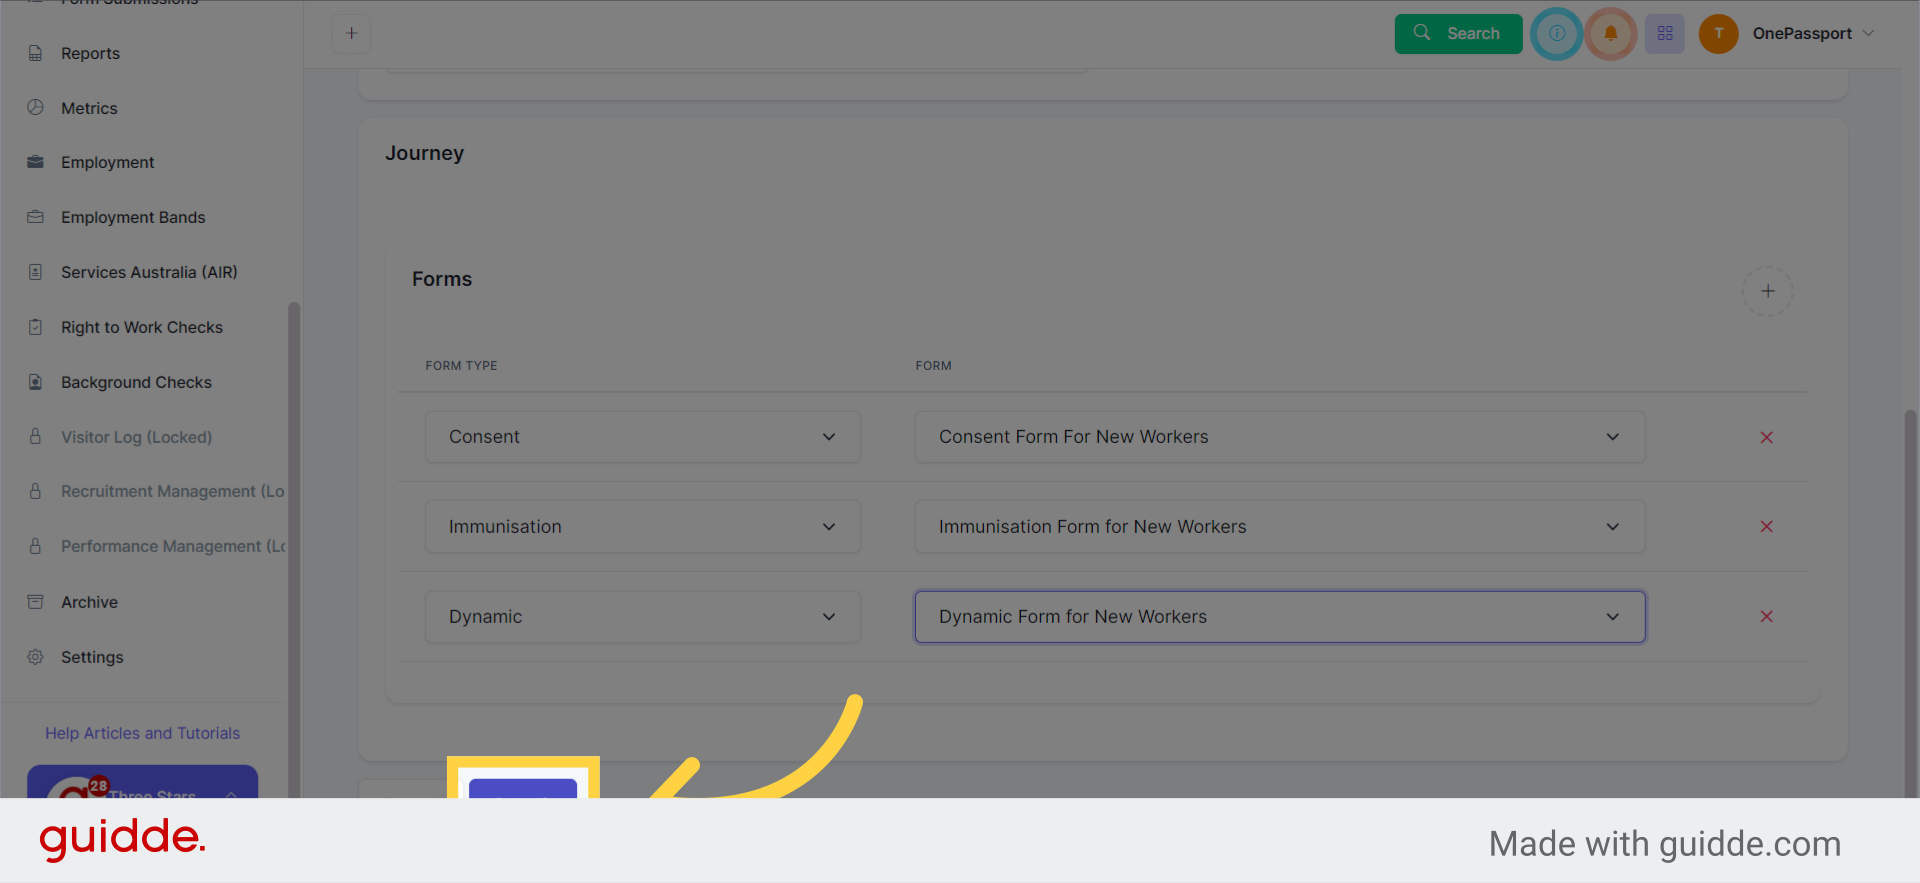 Should you wish to delete the form type, click the (x) icon on the right side. Click 'Submit' once satisfied with the Form Types included in the form